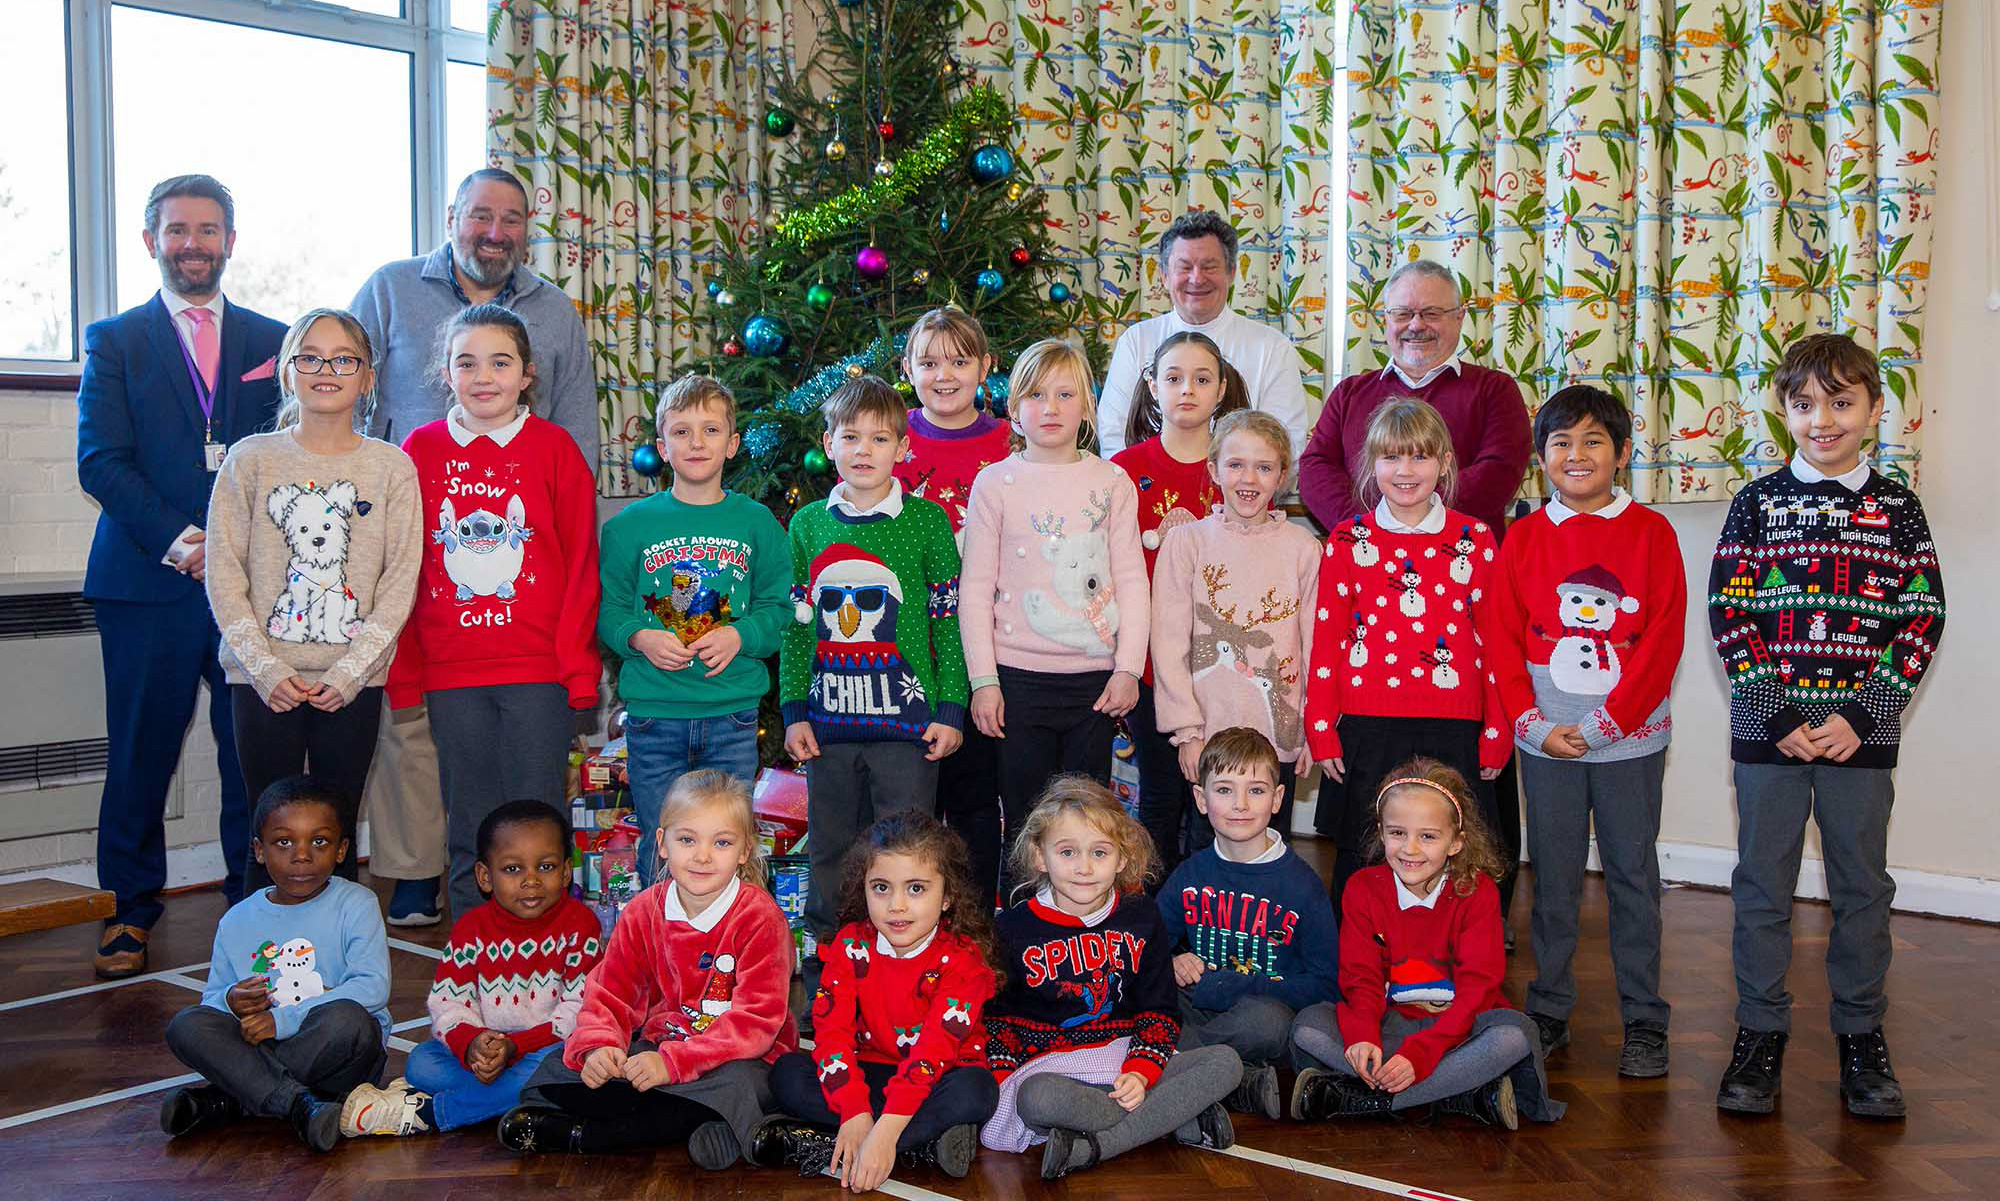 St Mary’s Primary School, Saffron Walden, pupils and staff thank Royal Arch Mason John Hubbard (back row second left) and Chris Hicks (back right).